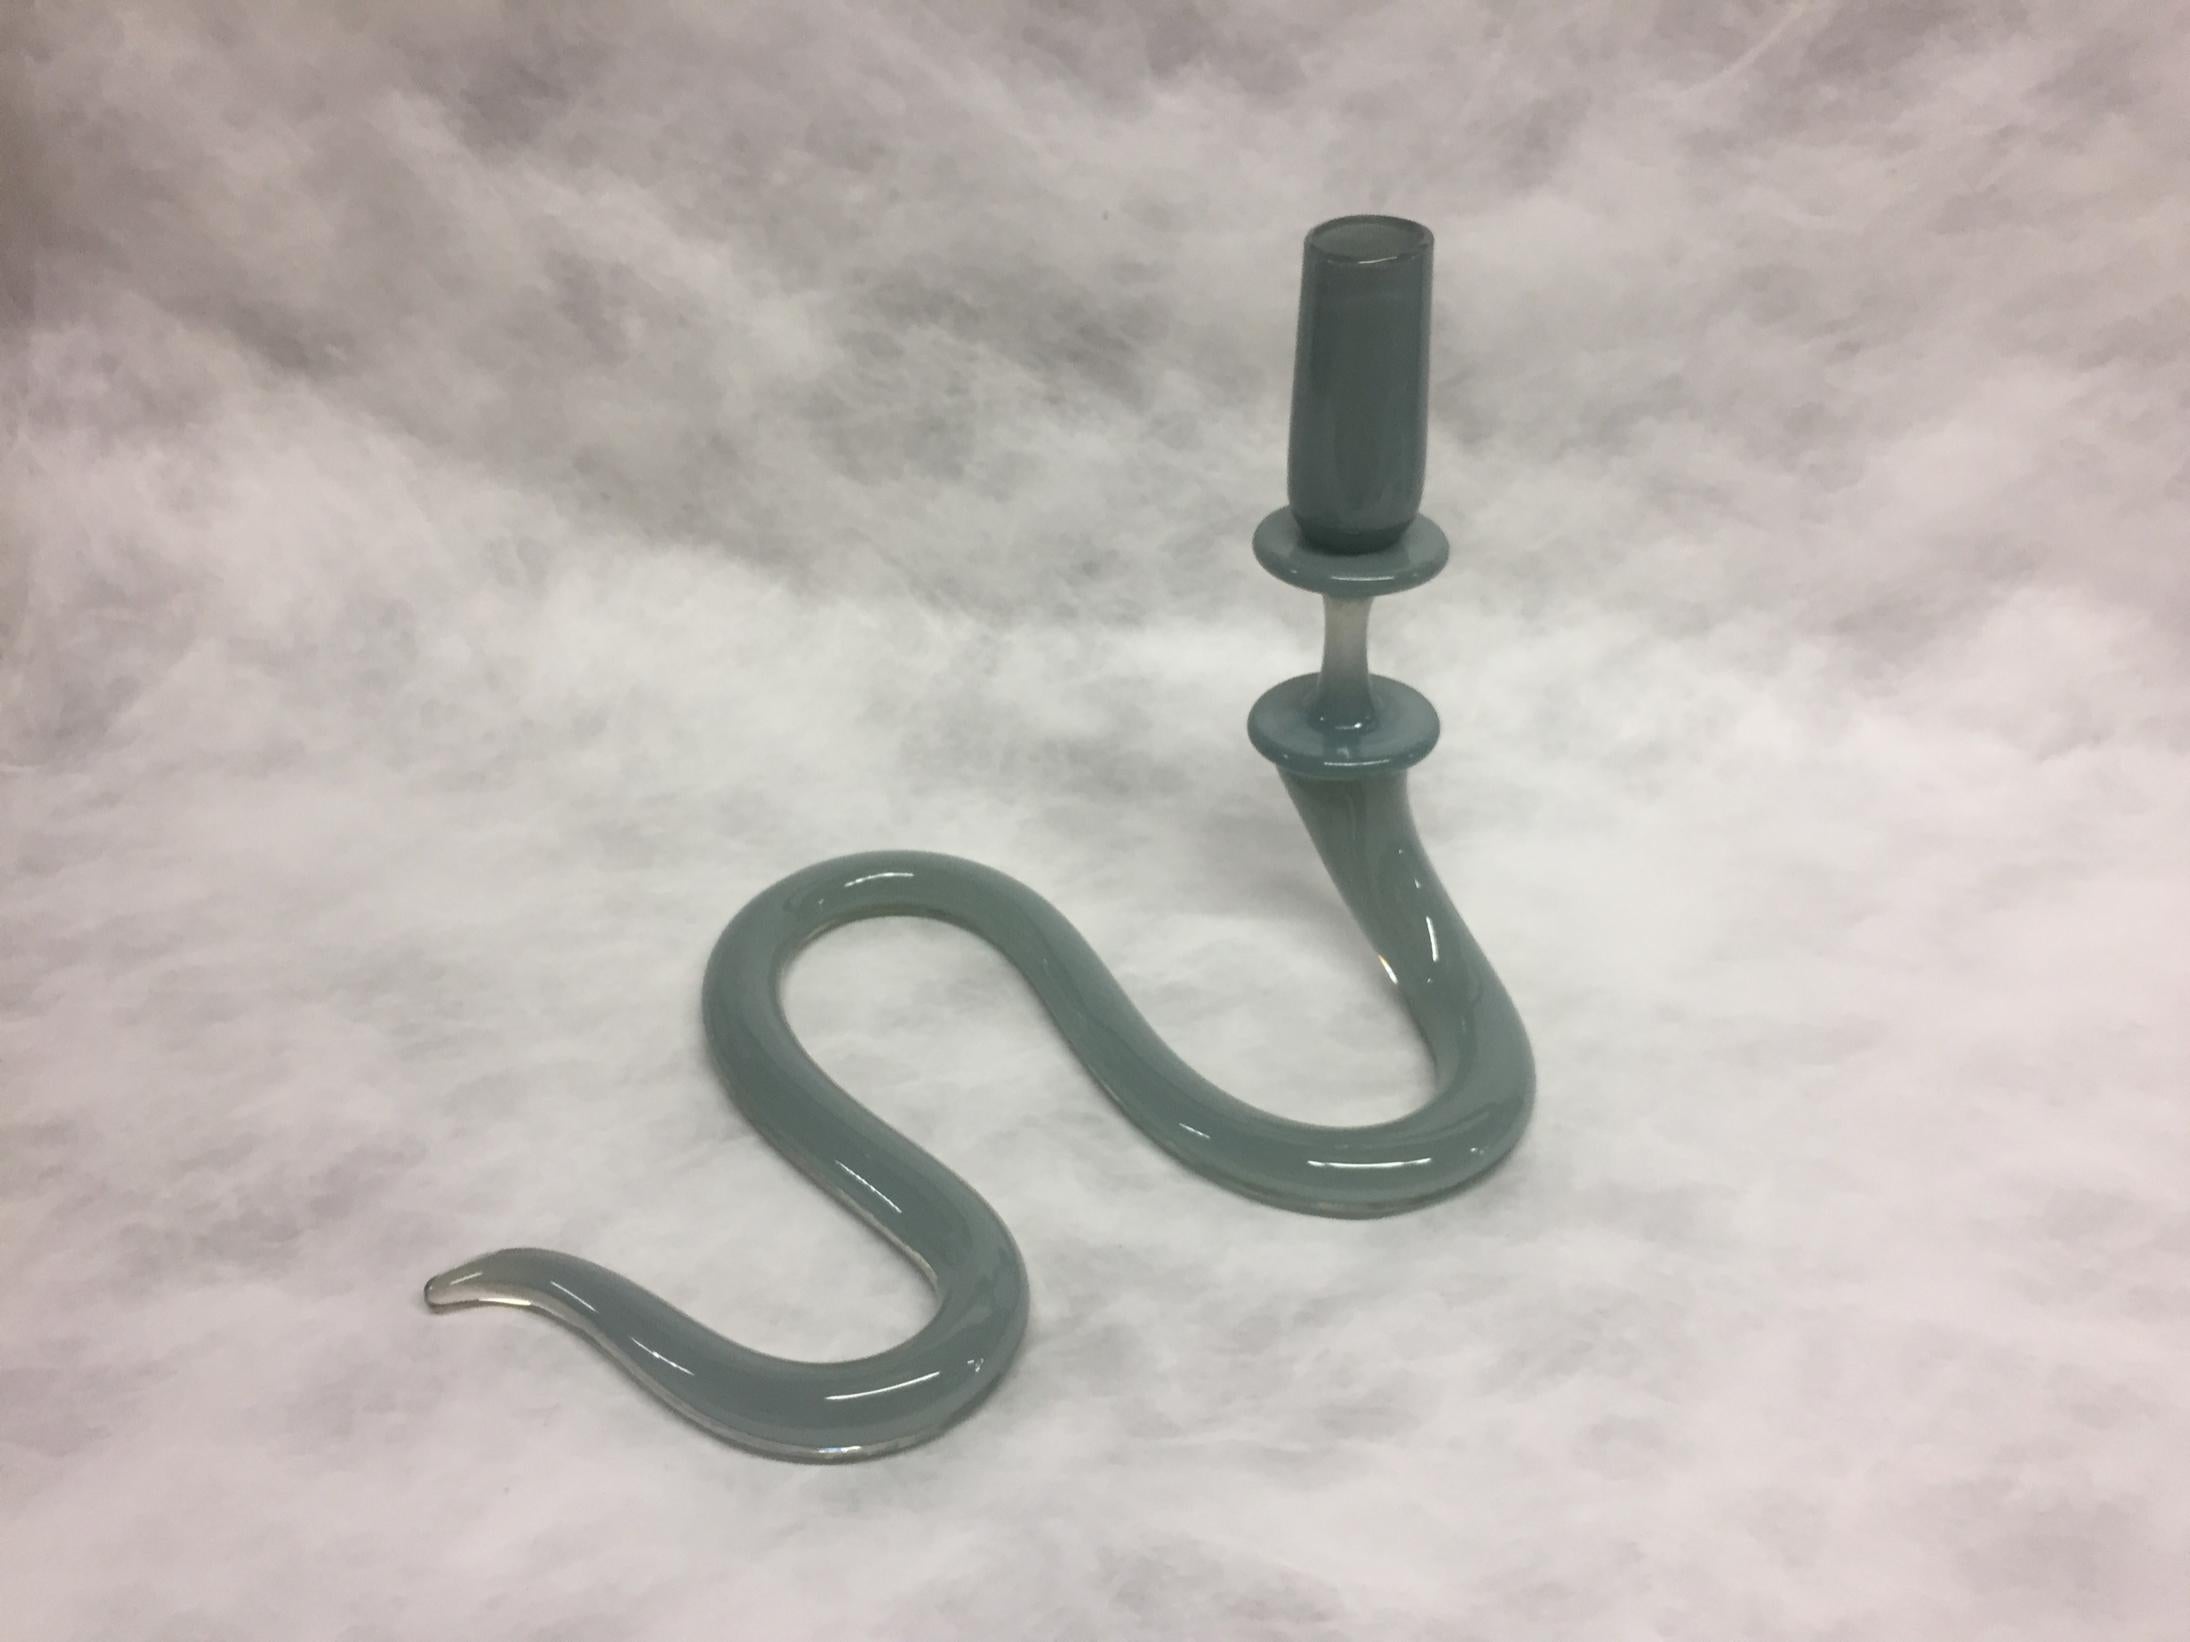 Unique single serpentine light sculpture in pigeon gray hand blown glass. Designed and made by Jeff Zimmerman, USA, 2017.

Limited number available. Please note that each item may differ slightly in color and shape.